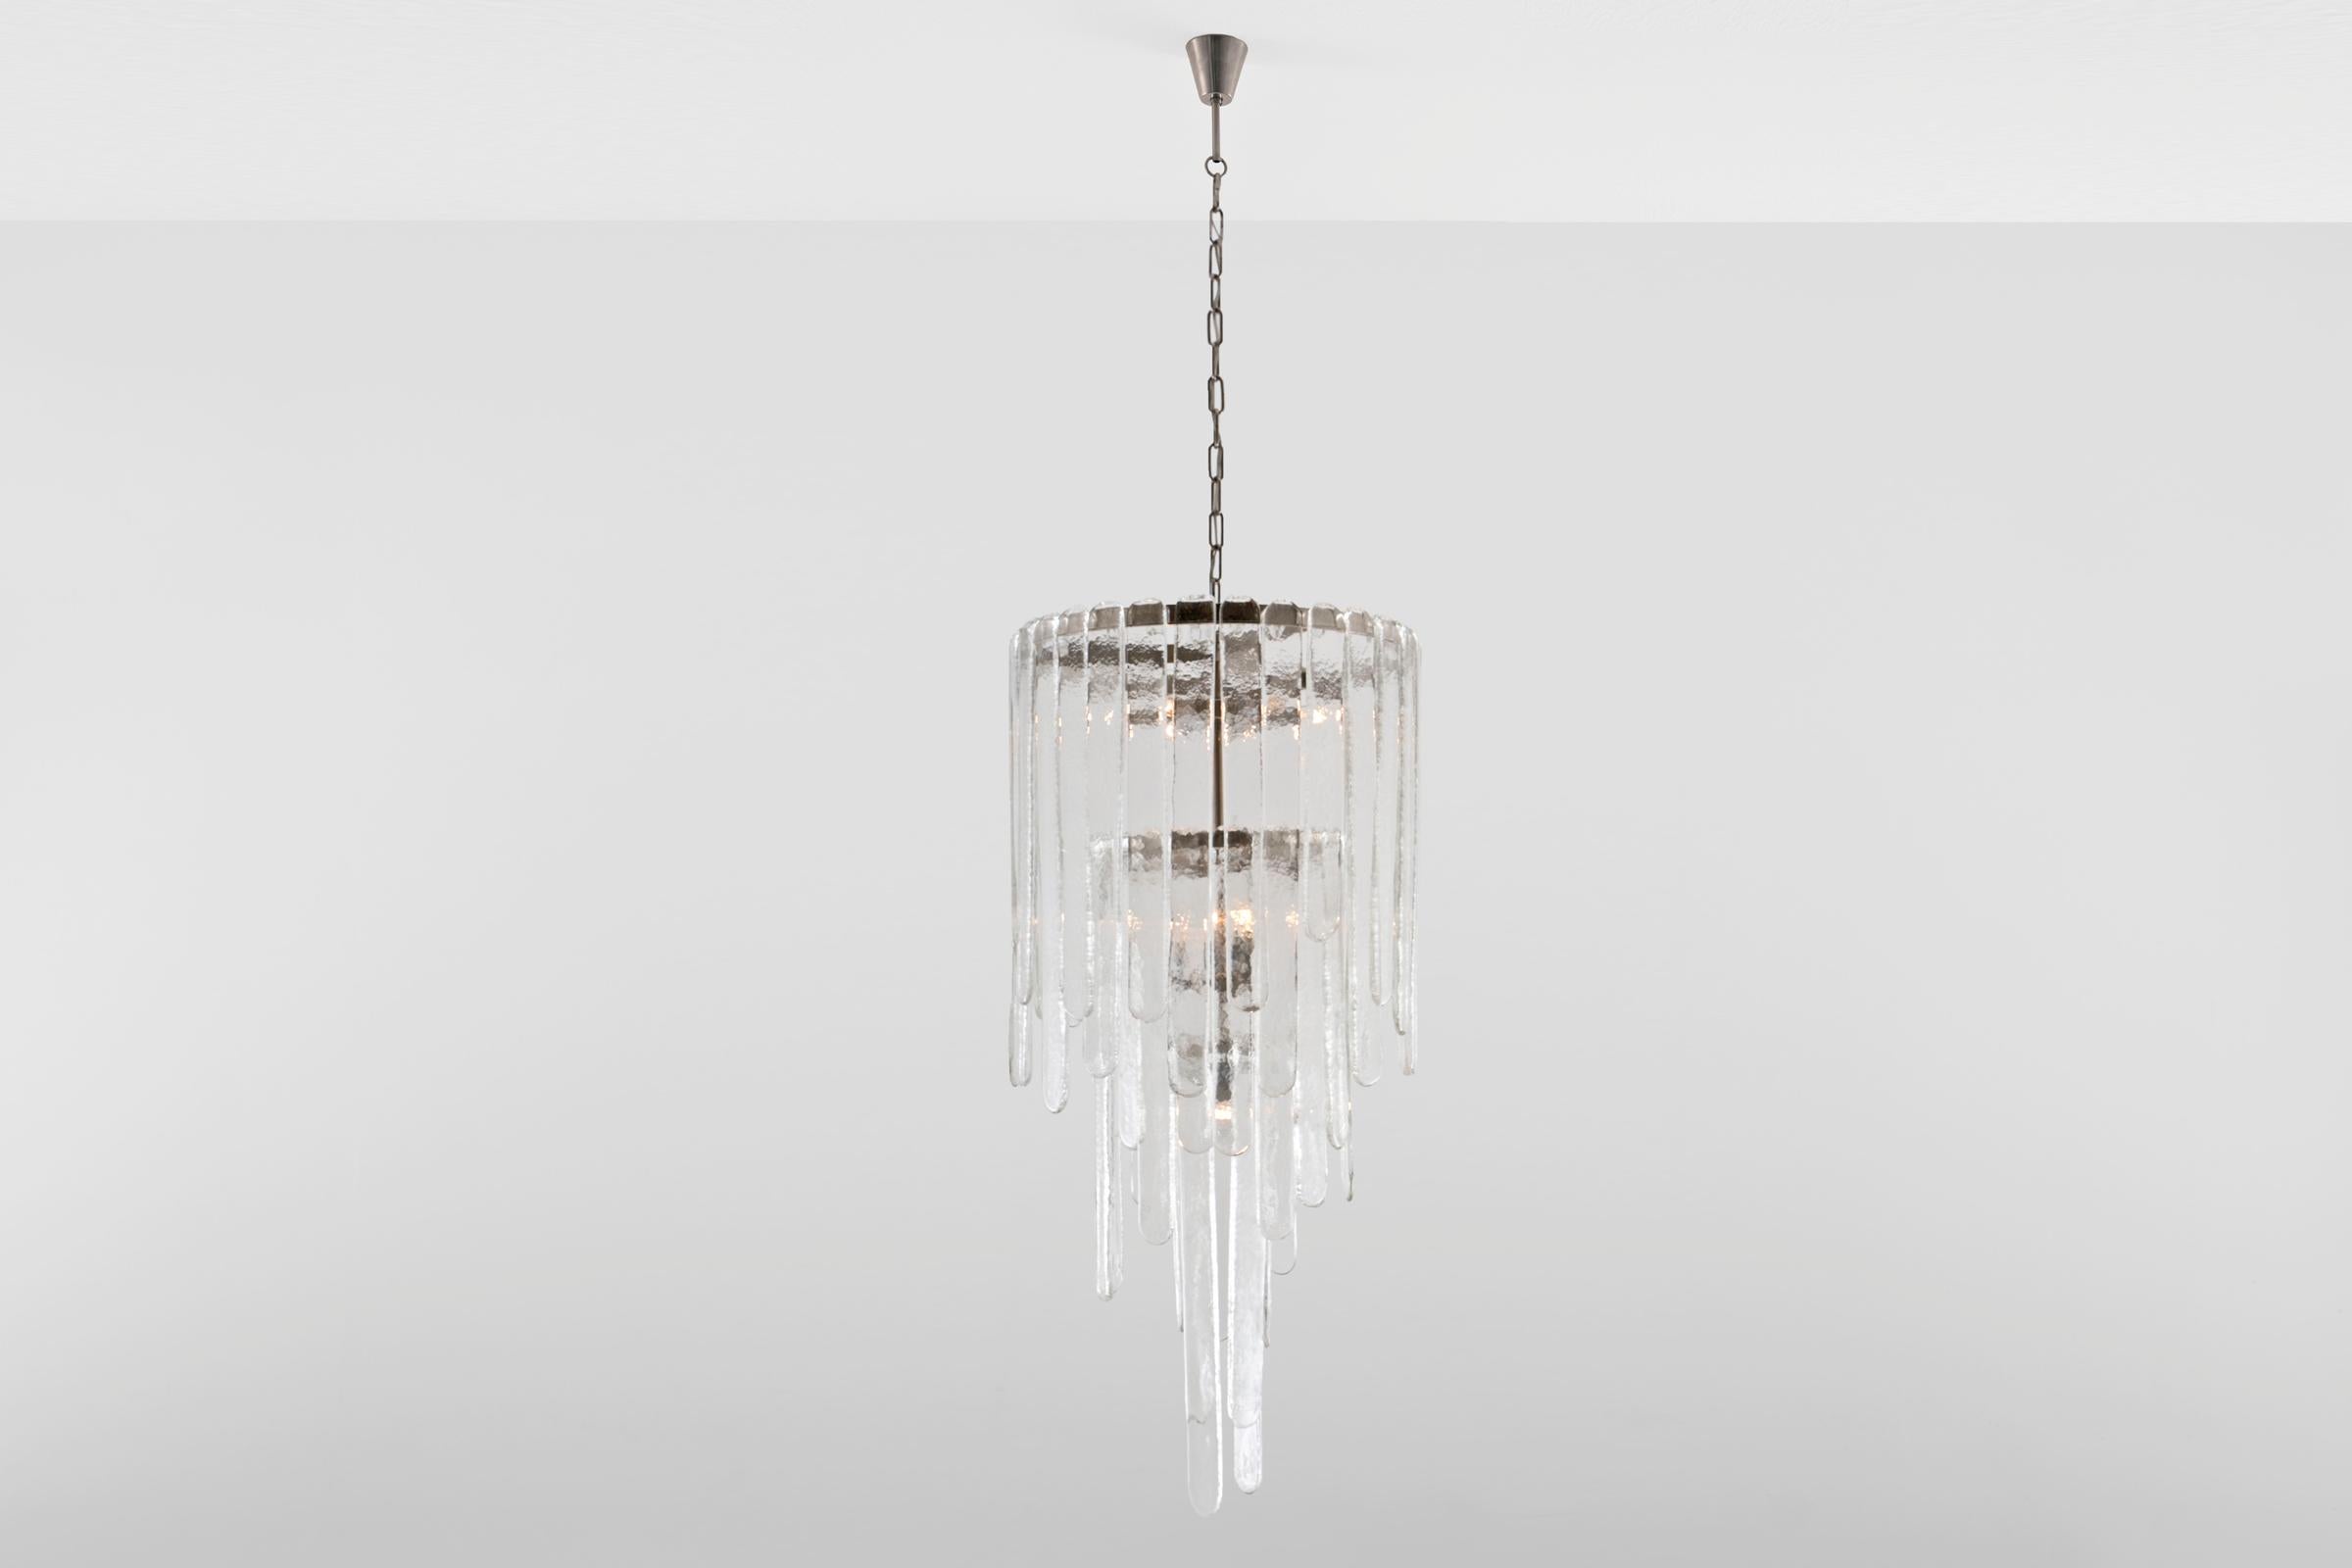 Mid-20th Century Mid-Century Modern Chandelier in Murano Glass by Carlo Nason for Mazzega, 1969